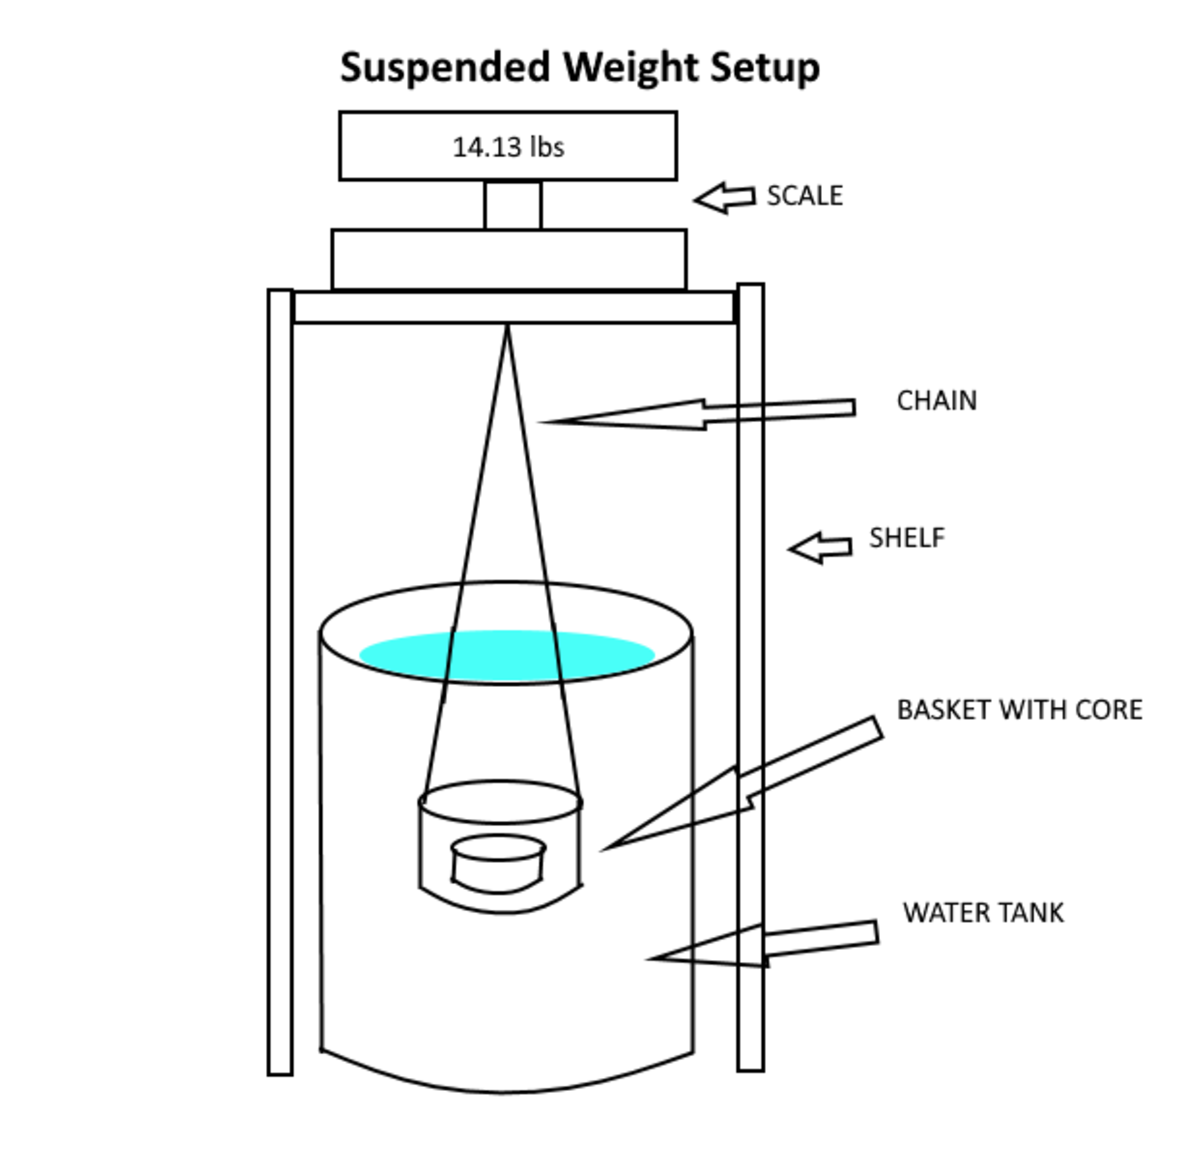 Getting the suspended weight for your specific gravity calculation requires a special setup where you hang a basket or cage from the bottom of your scale and into a water tank, and put the core inside the basket.